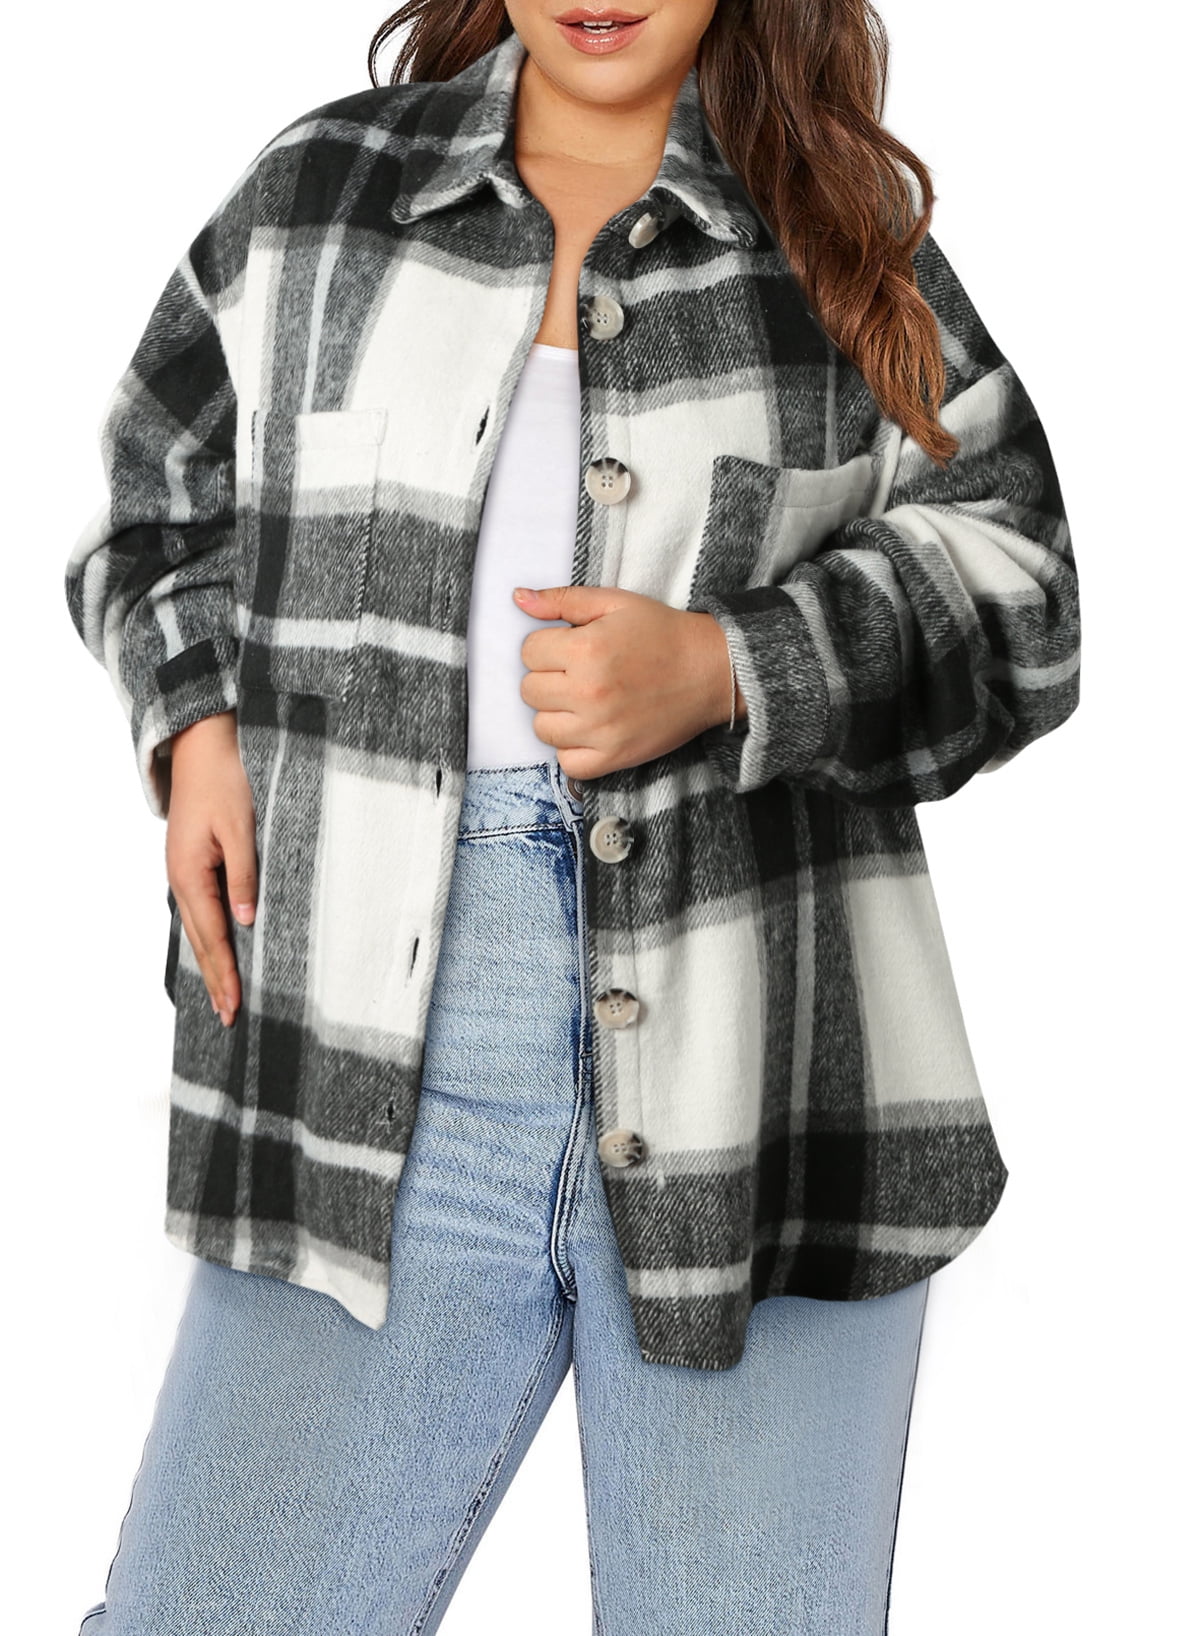 Eytino Shacket Jacket Women Plus Size Casual Long Sleeve Button Up Flannel  Plaid Shacket Coats with Pockets 4X Gray 